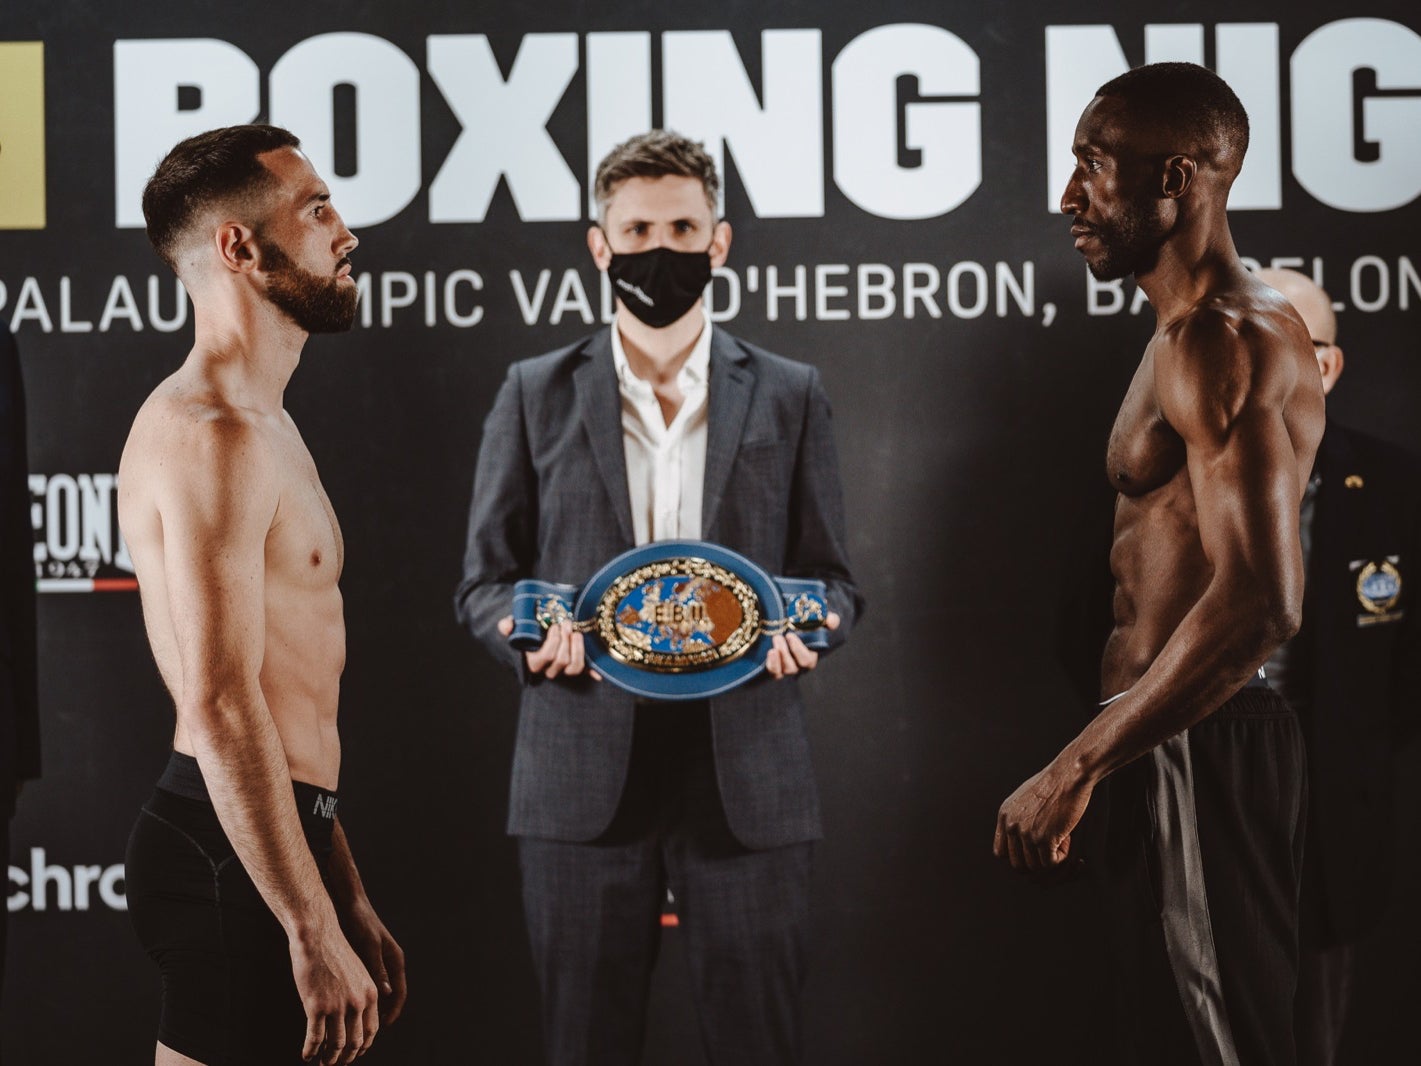 Sandor Martin vs Kay Prosper live stream How to watch fight online and on TV The Independent